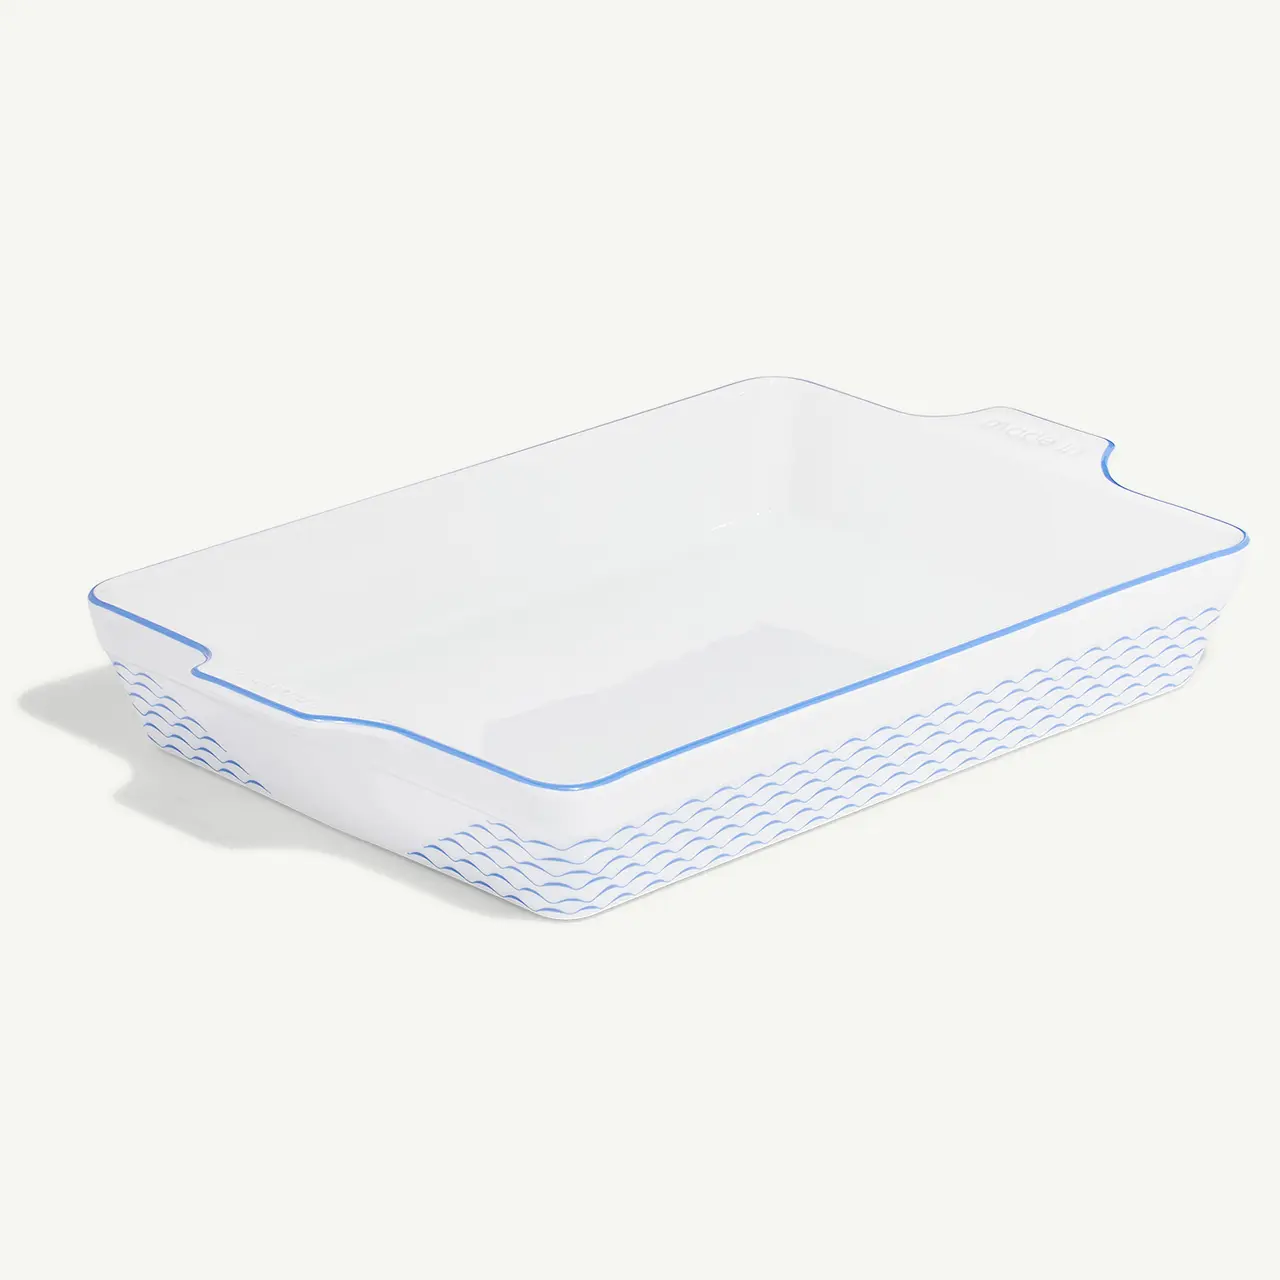 A white rectangular ceramic baking dish with blue trim and a woven pattern design on the exterior.